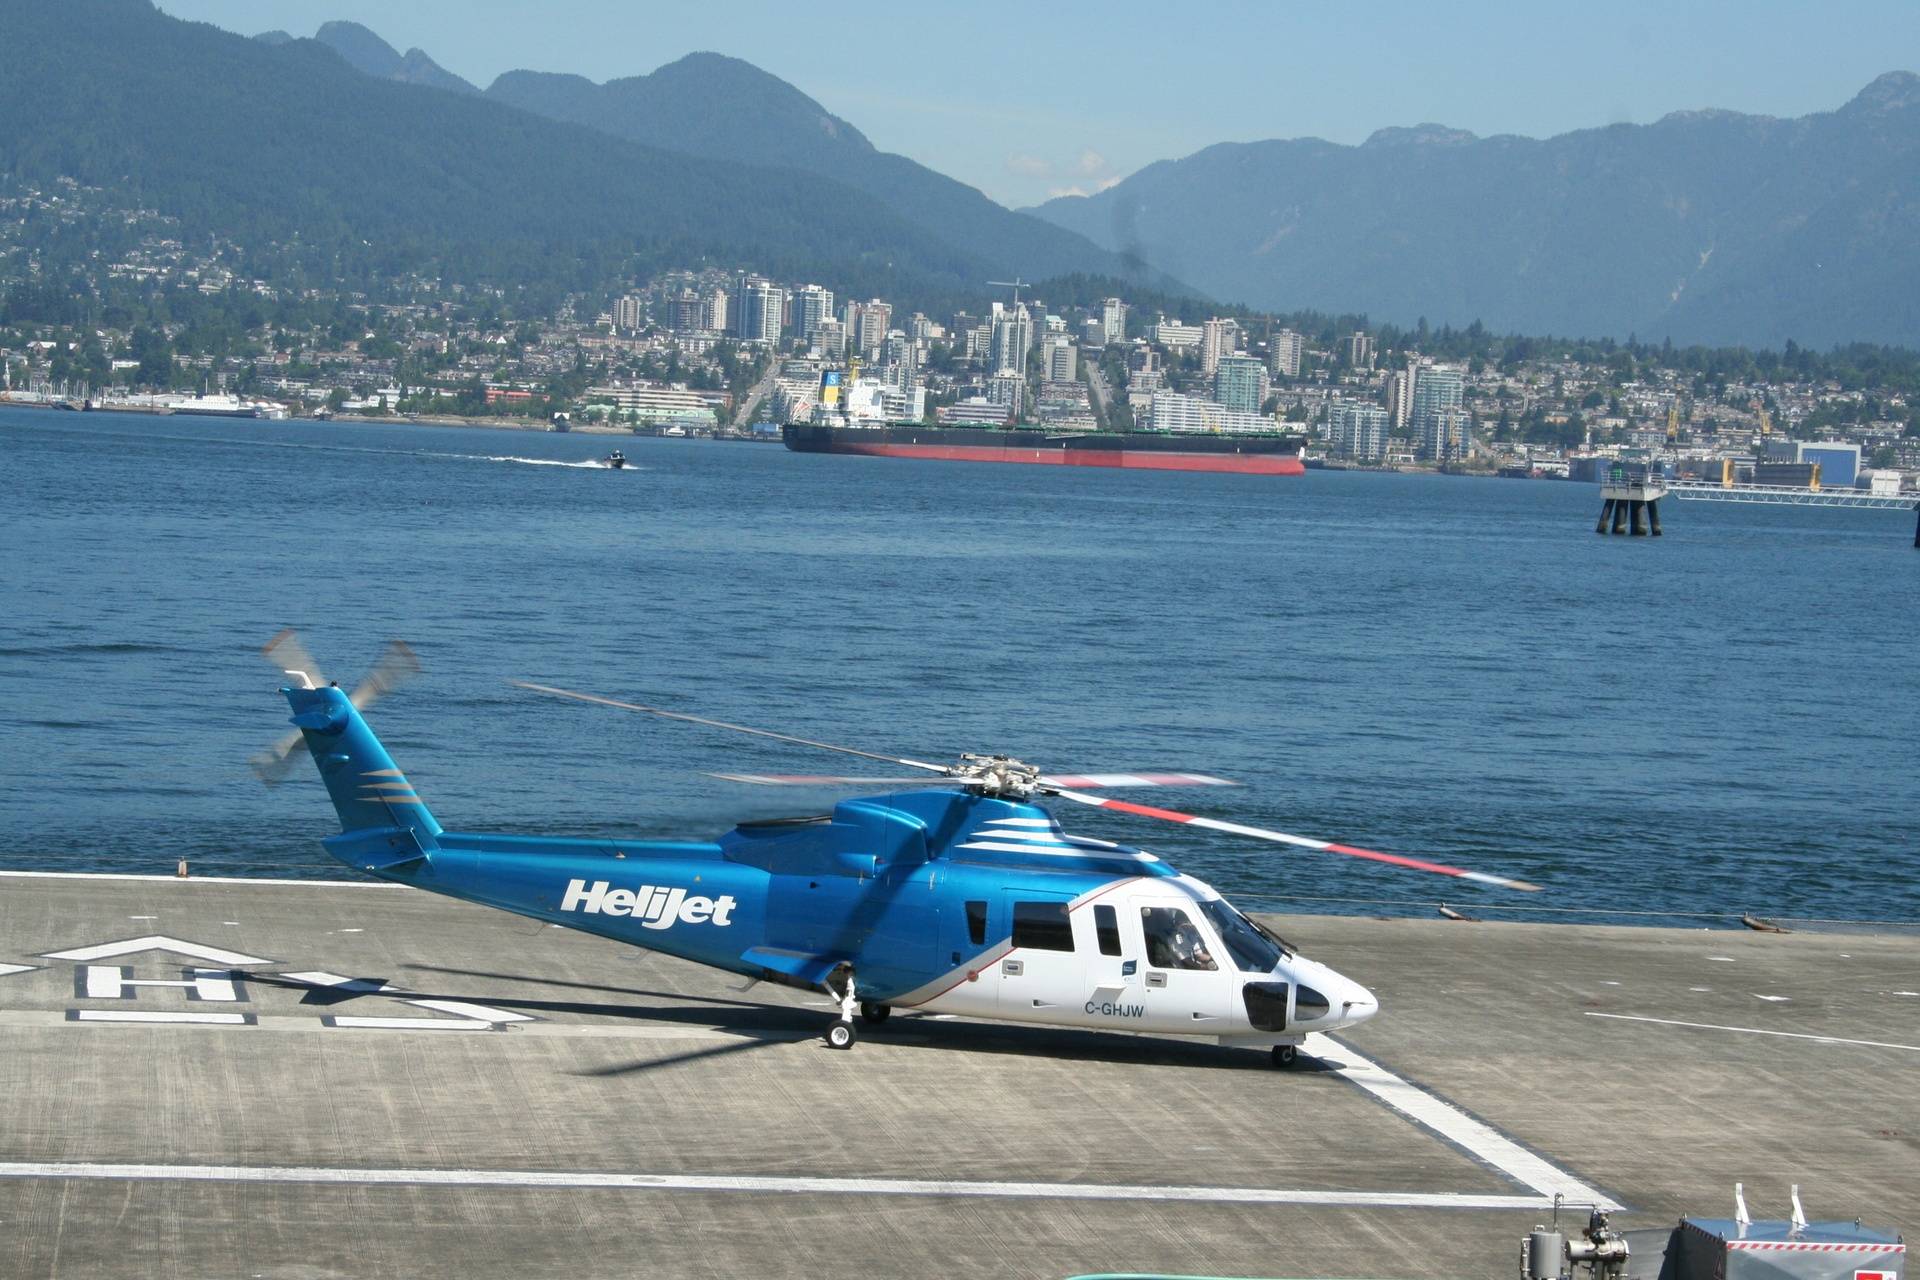 Helijet Terminal, Downtown Vancouver with Oil Tanker in background!